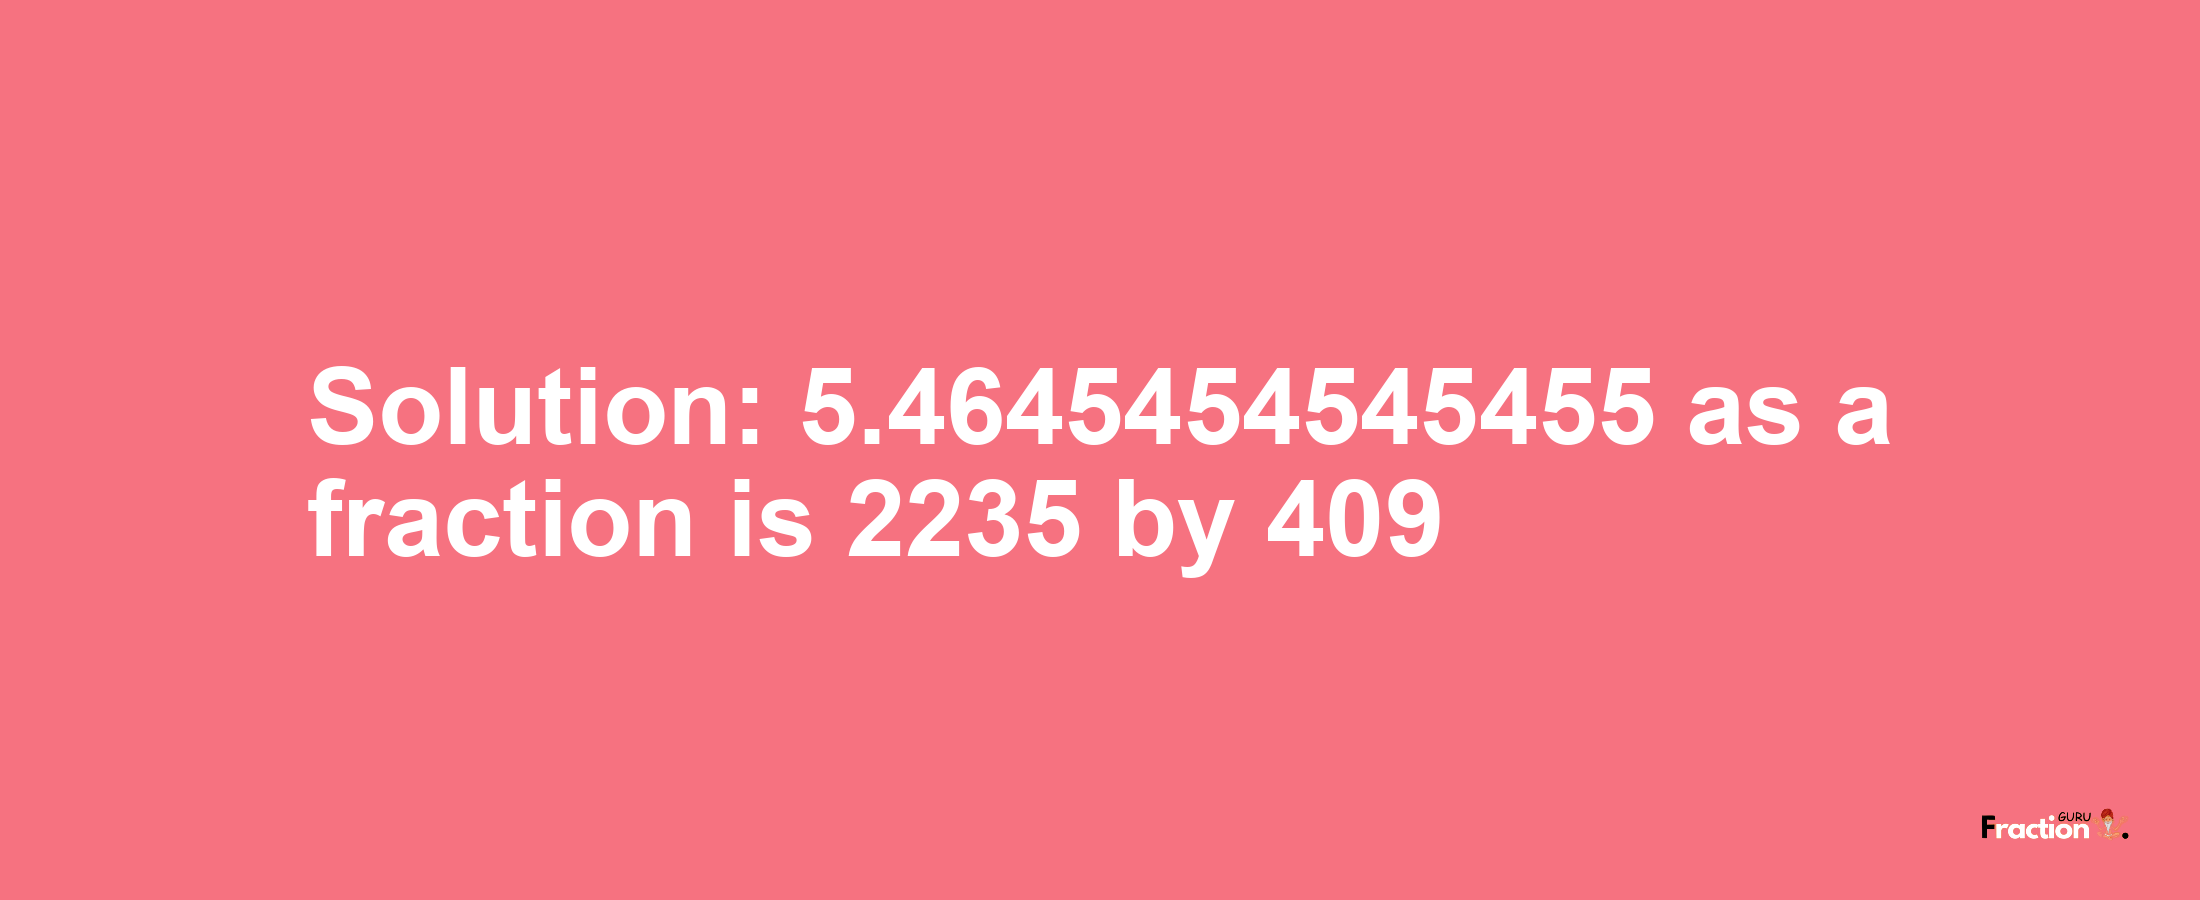 Solution:5.4645454545455 as a fraction is 2235/409